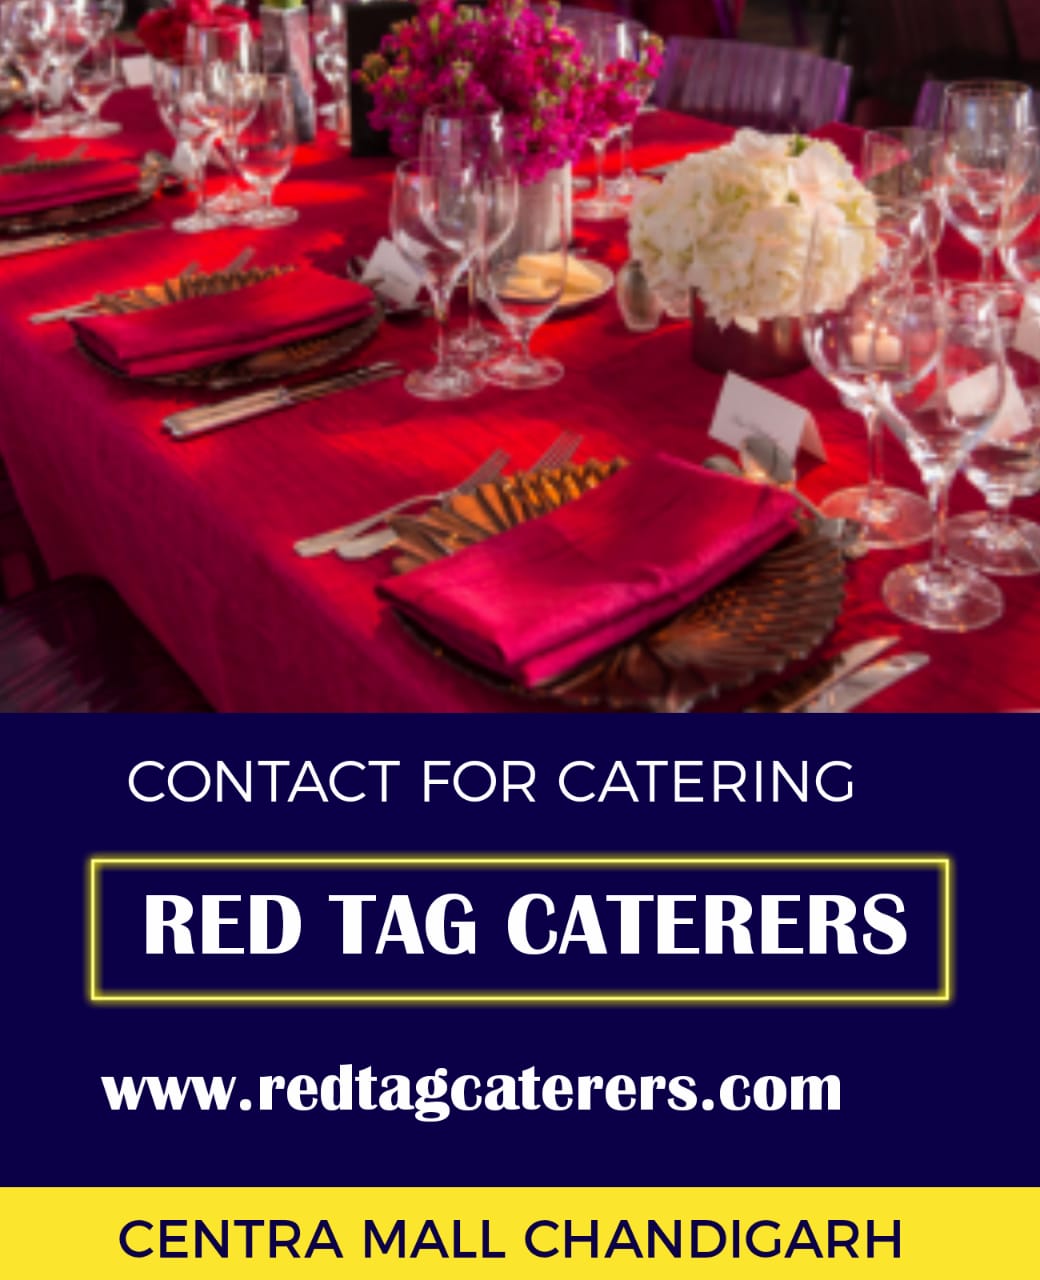 Top cheapest catering service in Chandigarh | Red Tag Caterers | Professional caterers in Chandigarh, top luxury caterers in Chandigarh, experience caterers in Chandigarh, cheapest catering service in Chandigarh, Best caterers in Chandigarh - GL46293